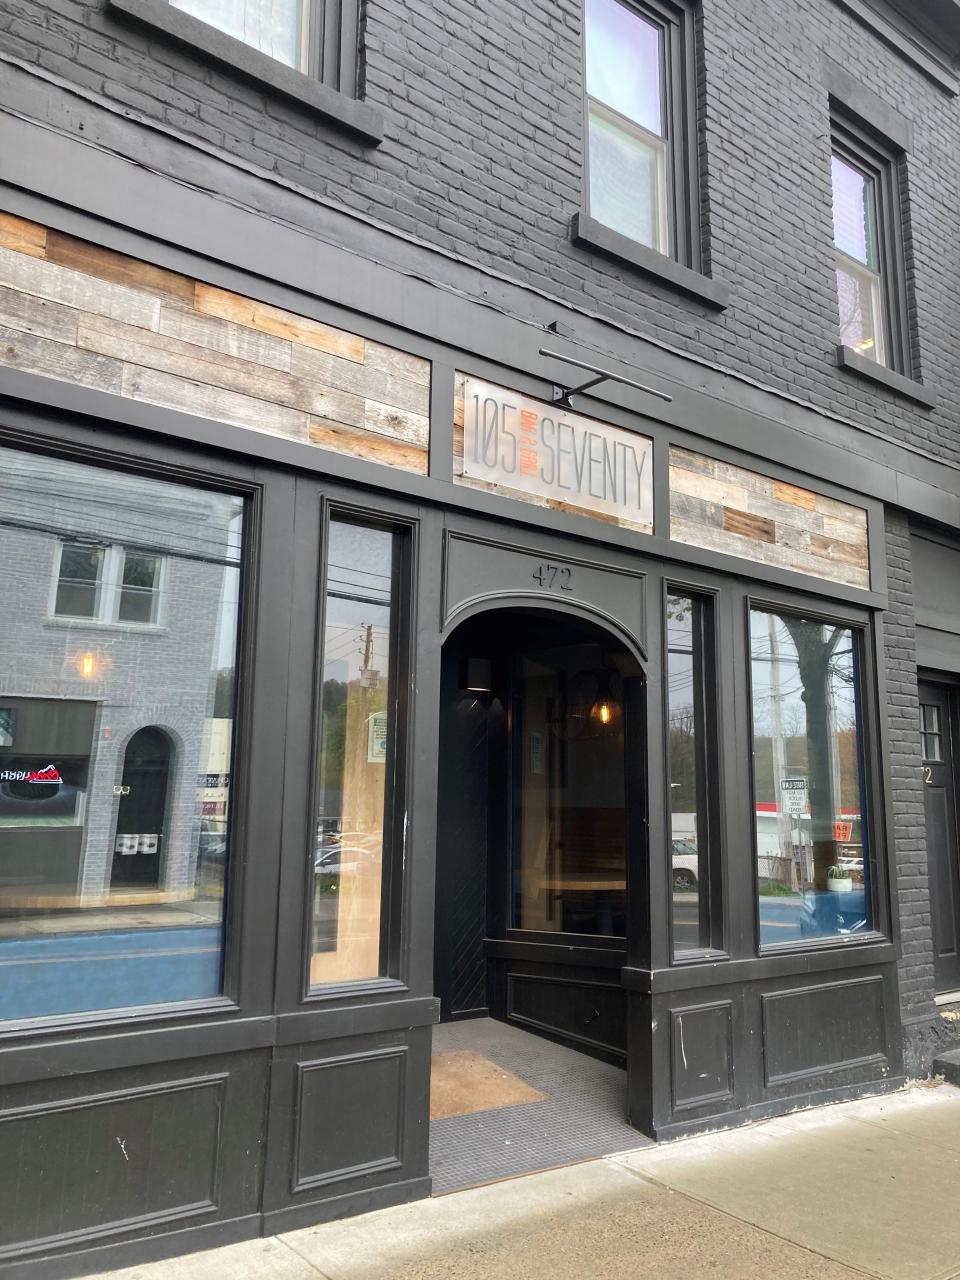 The old Mission Taqueria/105-Seventy space will turn into Freddy’s, which, according to owners Christina Drake Safarowic  and Chef Matt Safarowic, will offer a hint of nostalgia mixed with modern American tavern fare. Photographed April 2022.